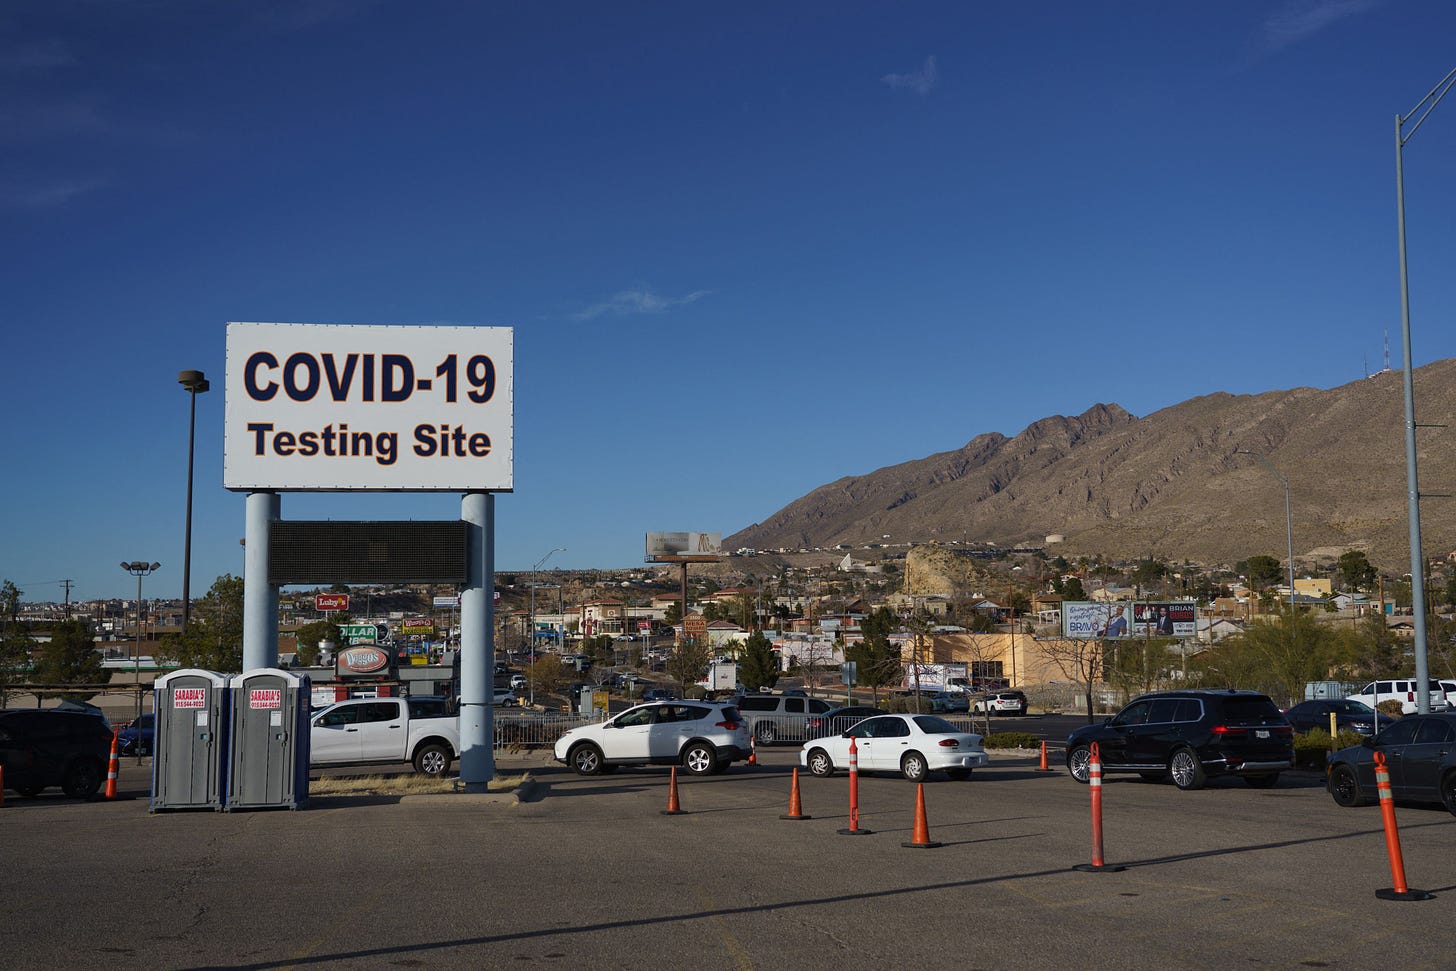 Under a blue sky and a sign advertising Covid-19 testing, cars line up. There are mountains in the background.